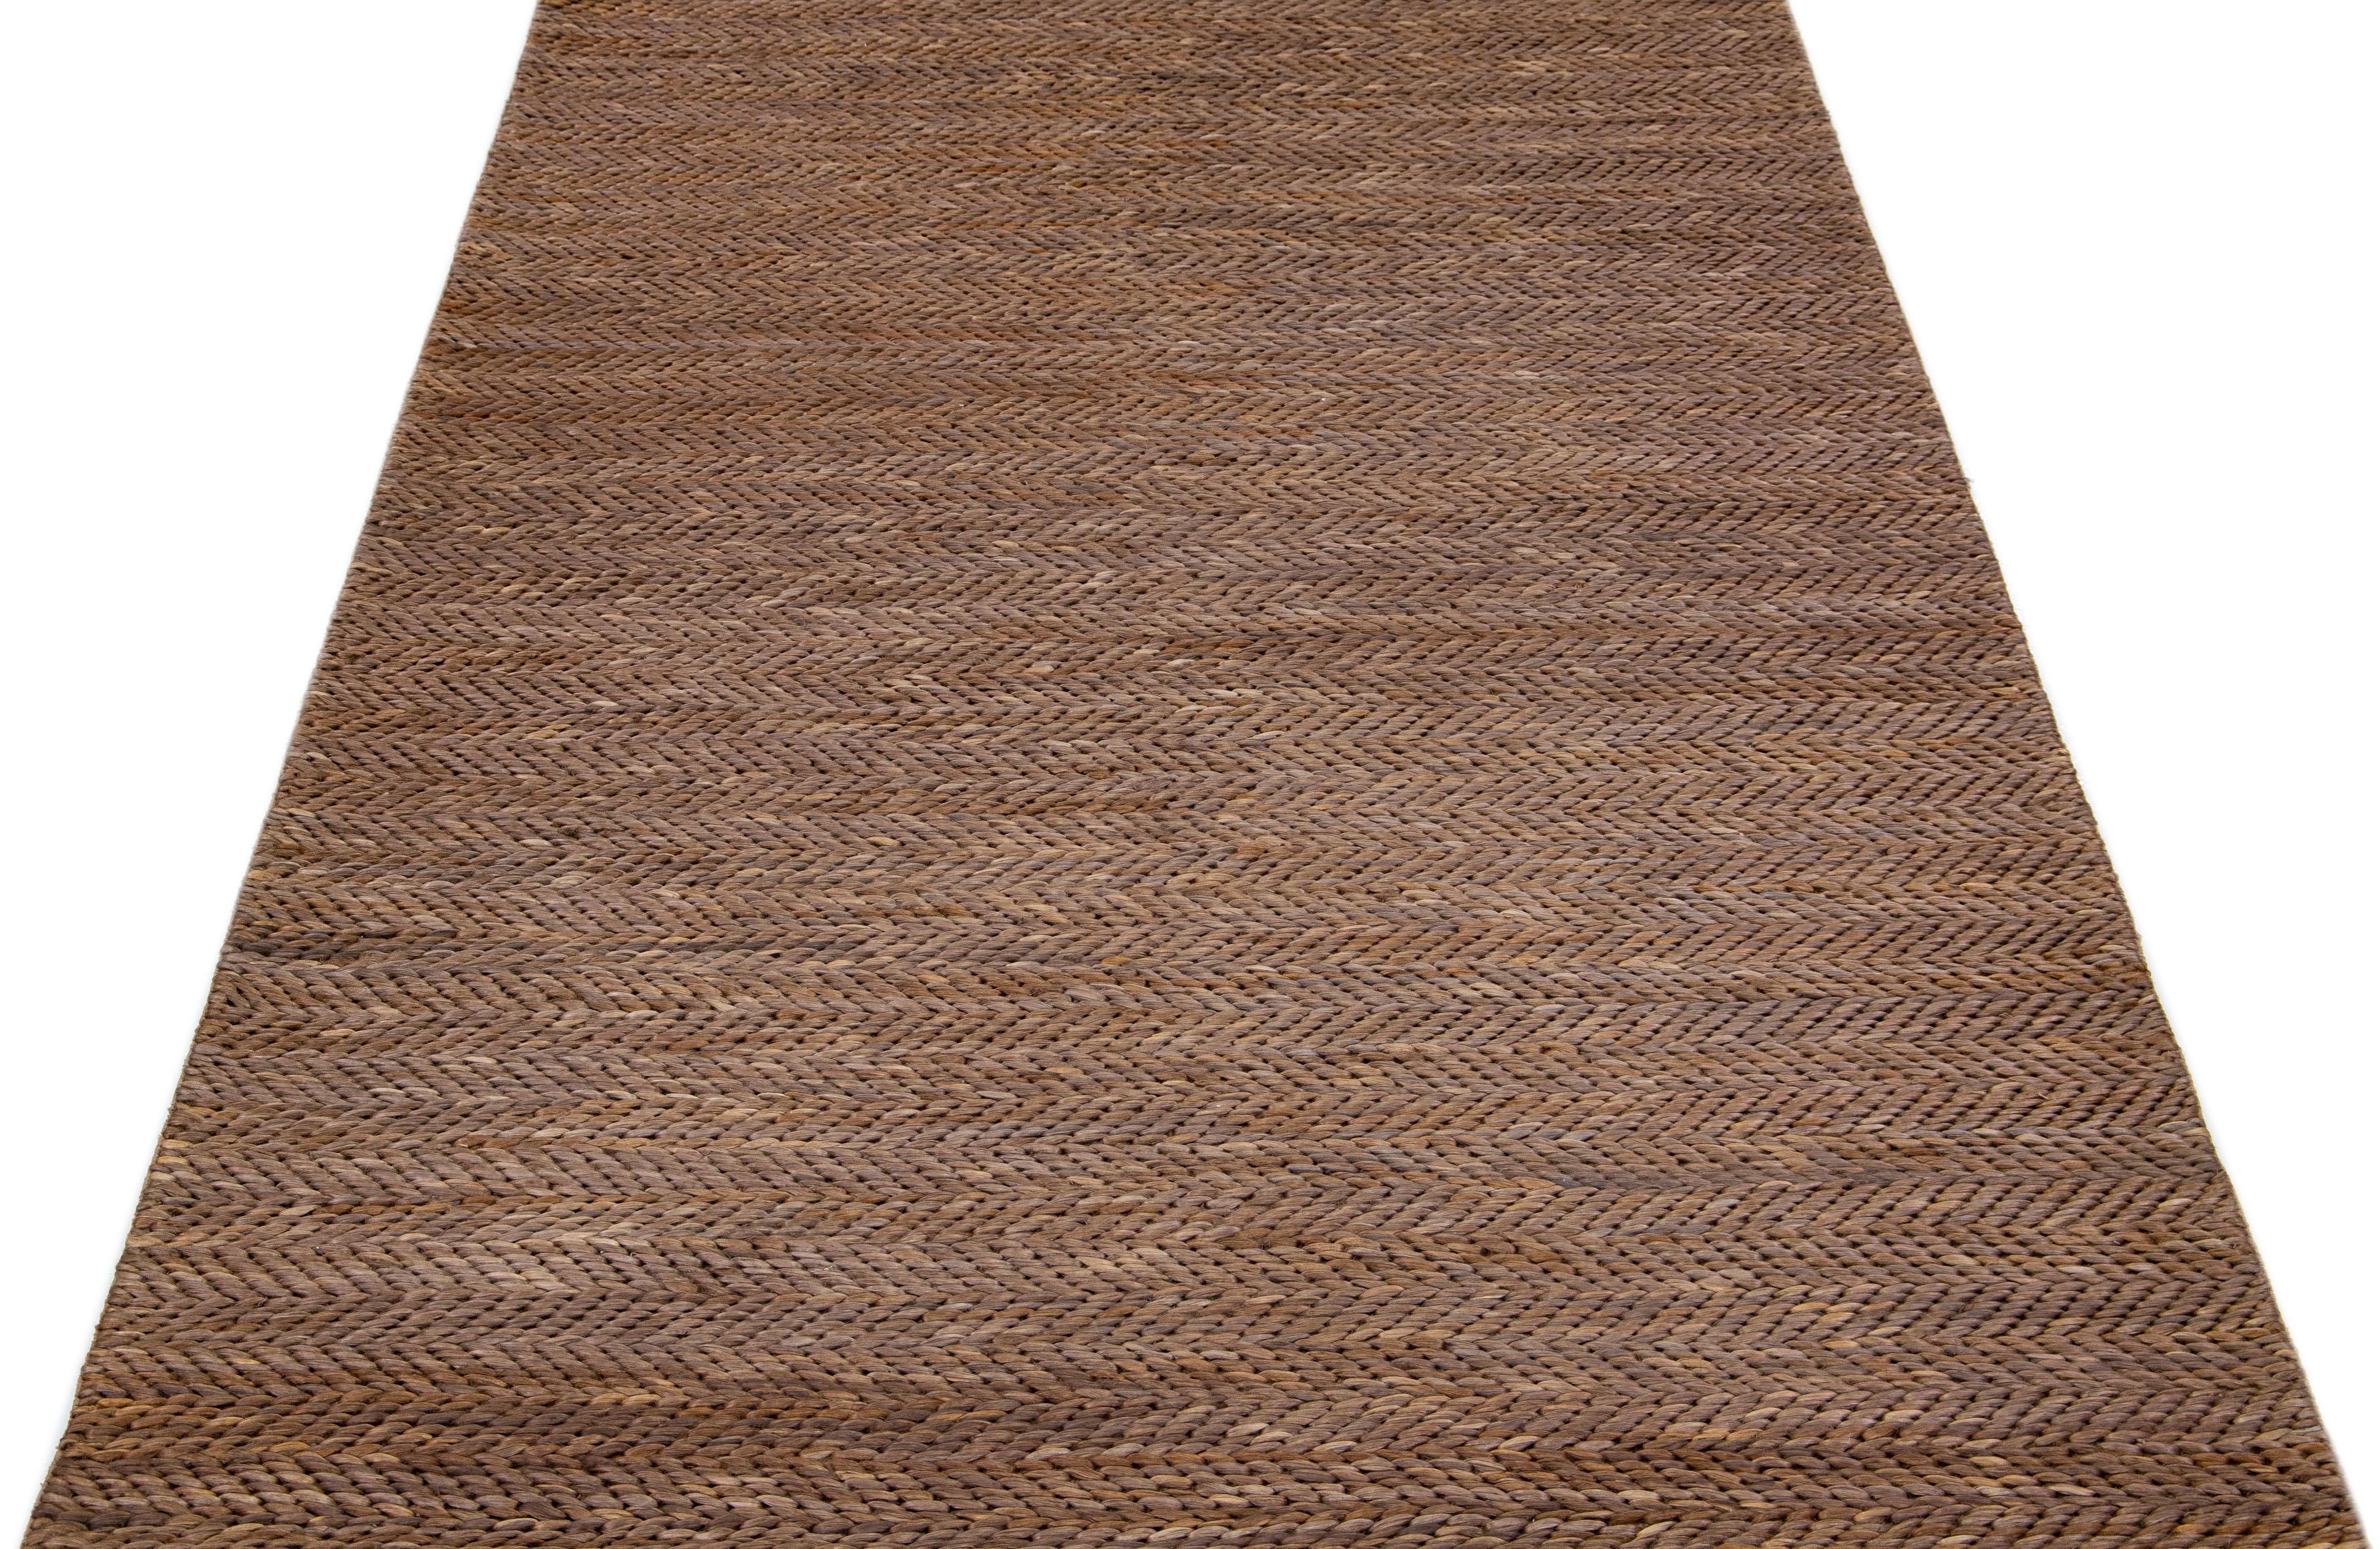 Beautiful natural hand-woven 70% jute and 30% cotton rug with a brown braided field. This Modern rug is perfect for farmhouse, coastal, rustic, bohemian, or contemporary styles of décor. It has a simple solid design that creates subtle shifts of